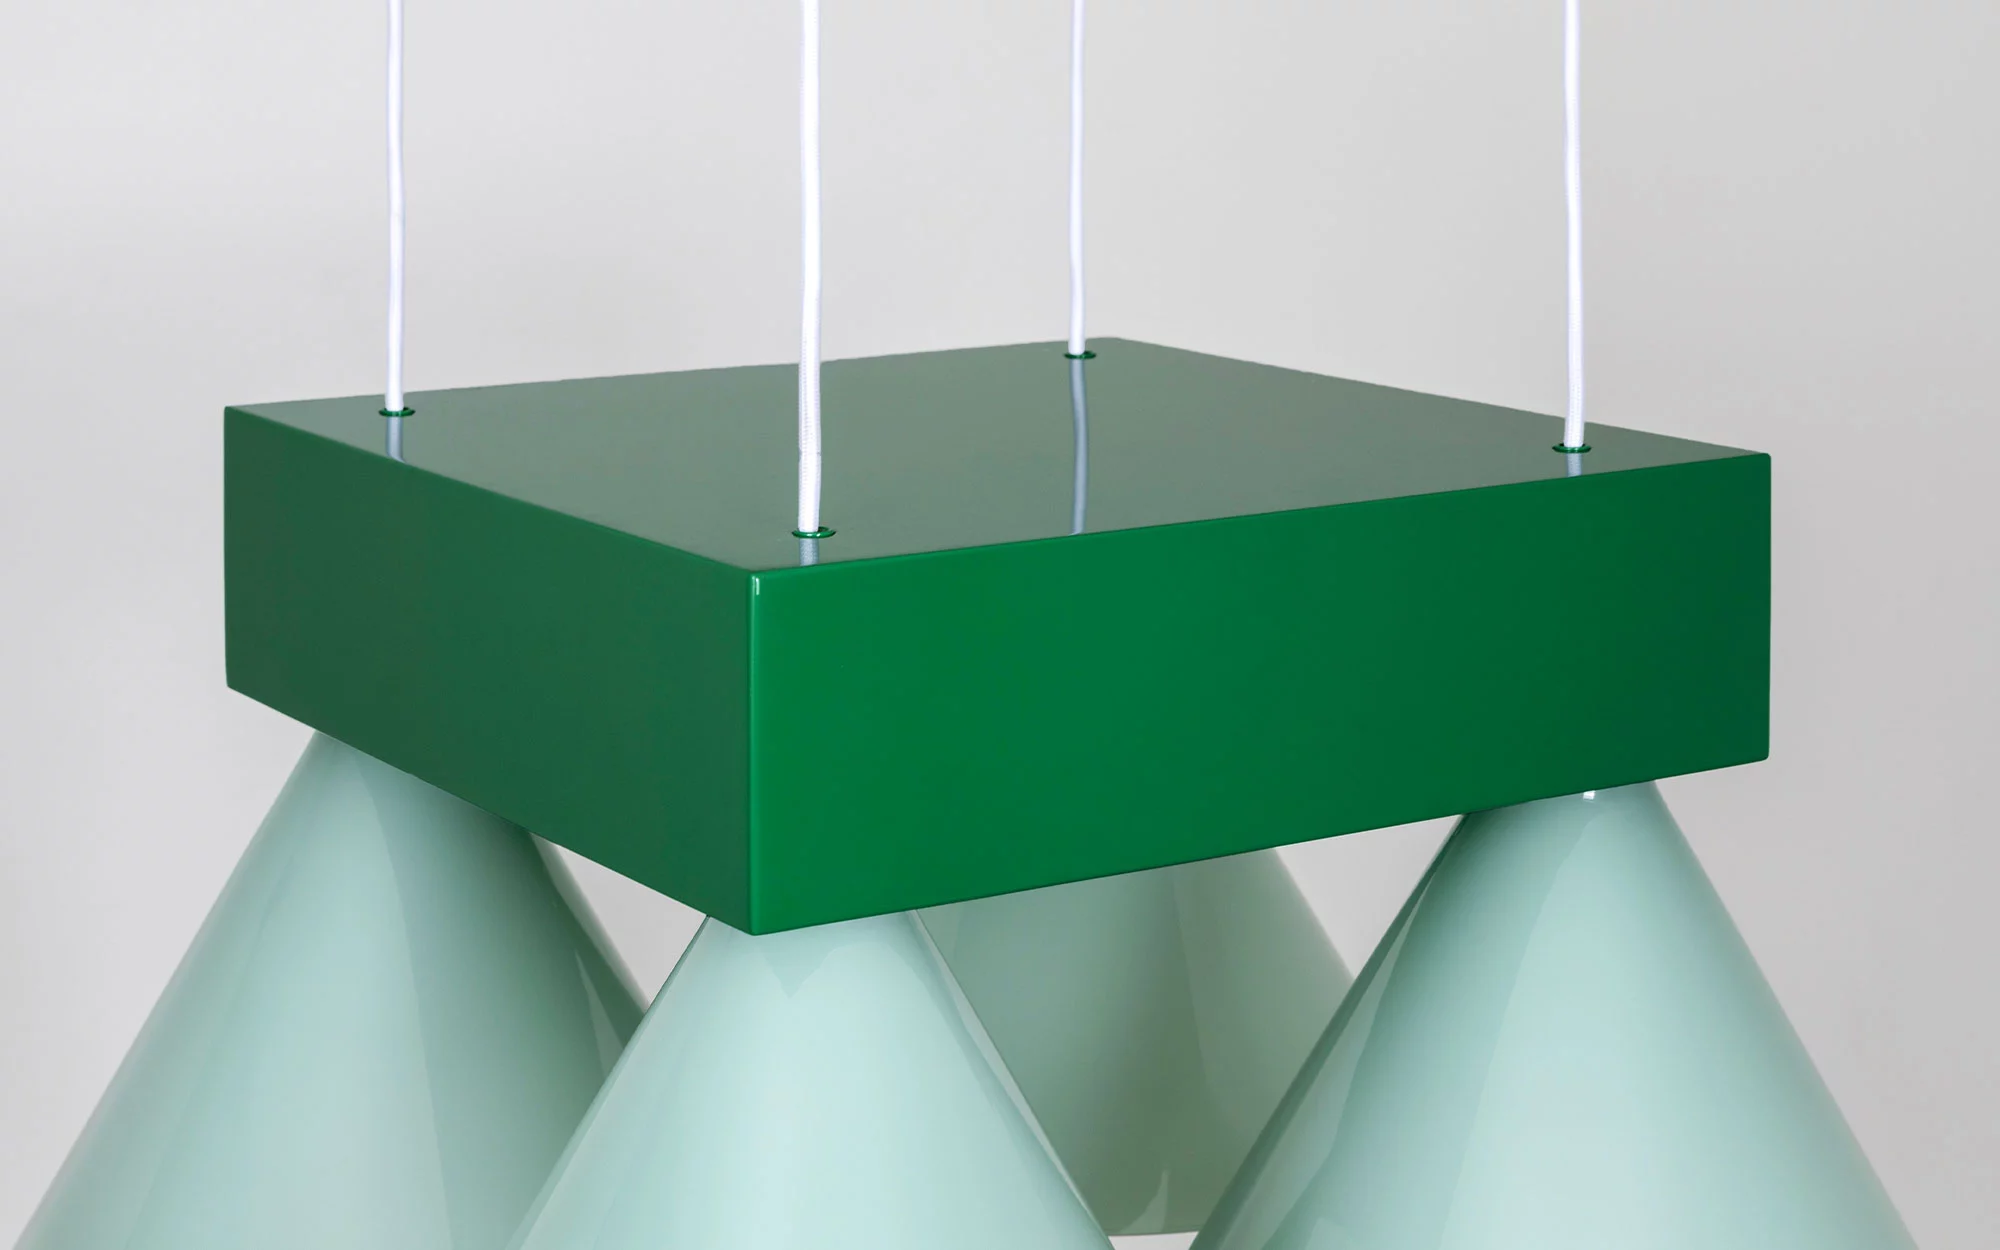 Signal C4S MONOCHROMATIC - Edward and Jay Barber and Osgerby - Pendant light - Galerie kreo